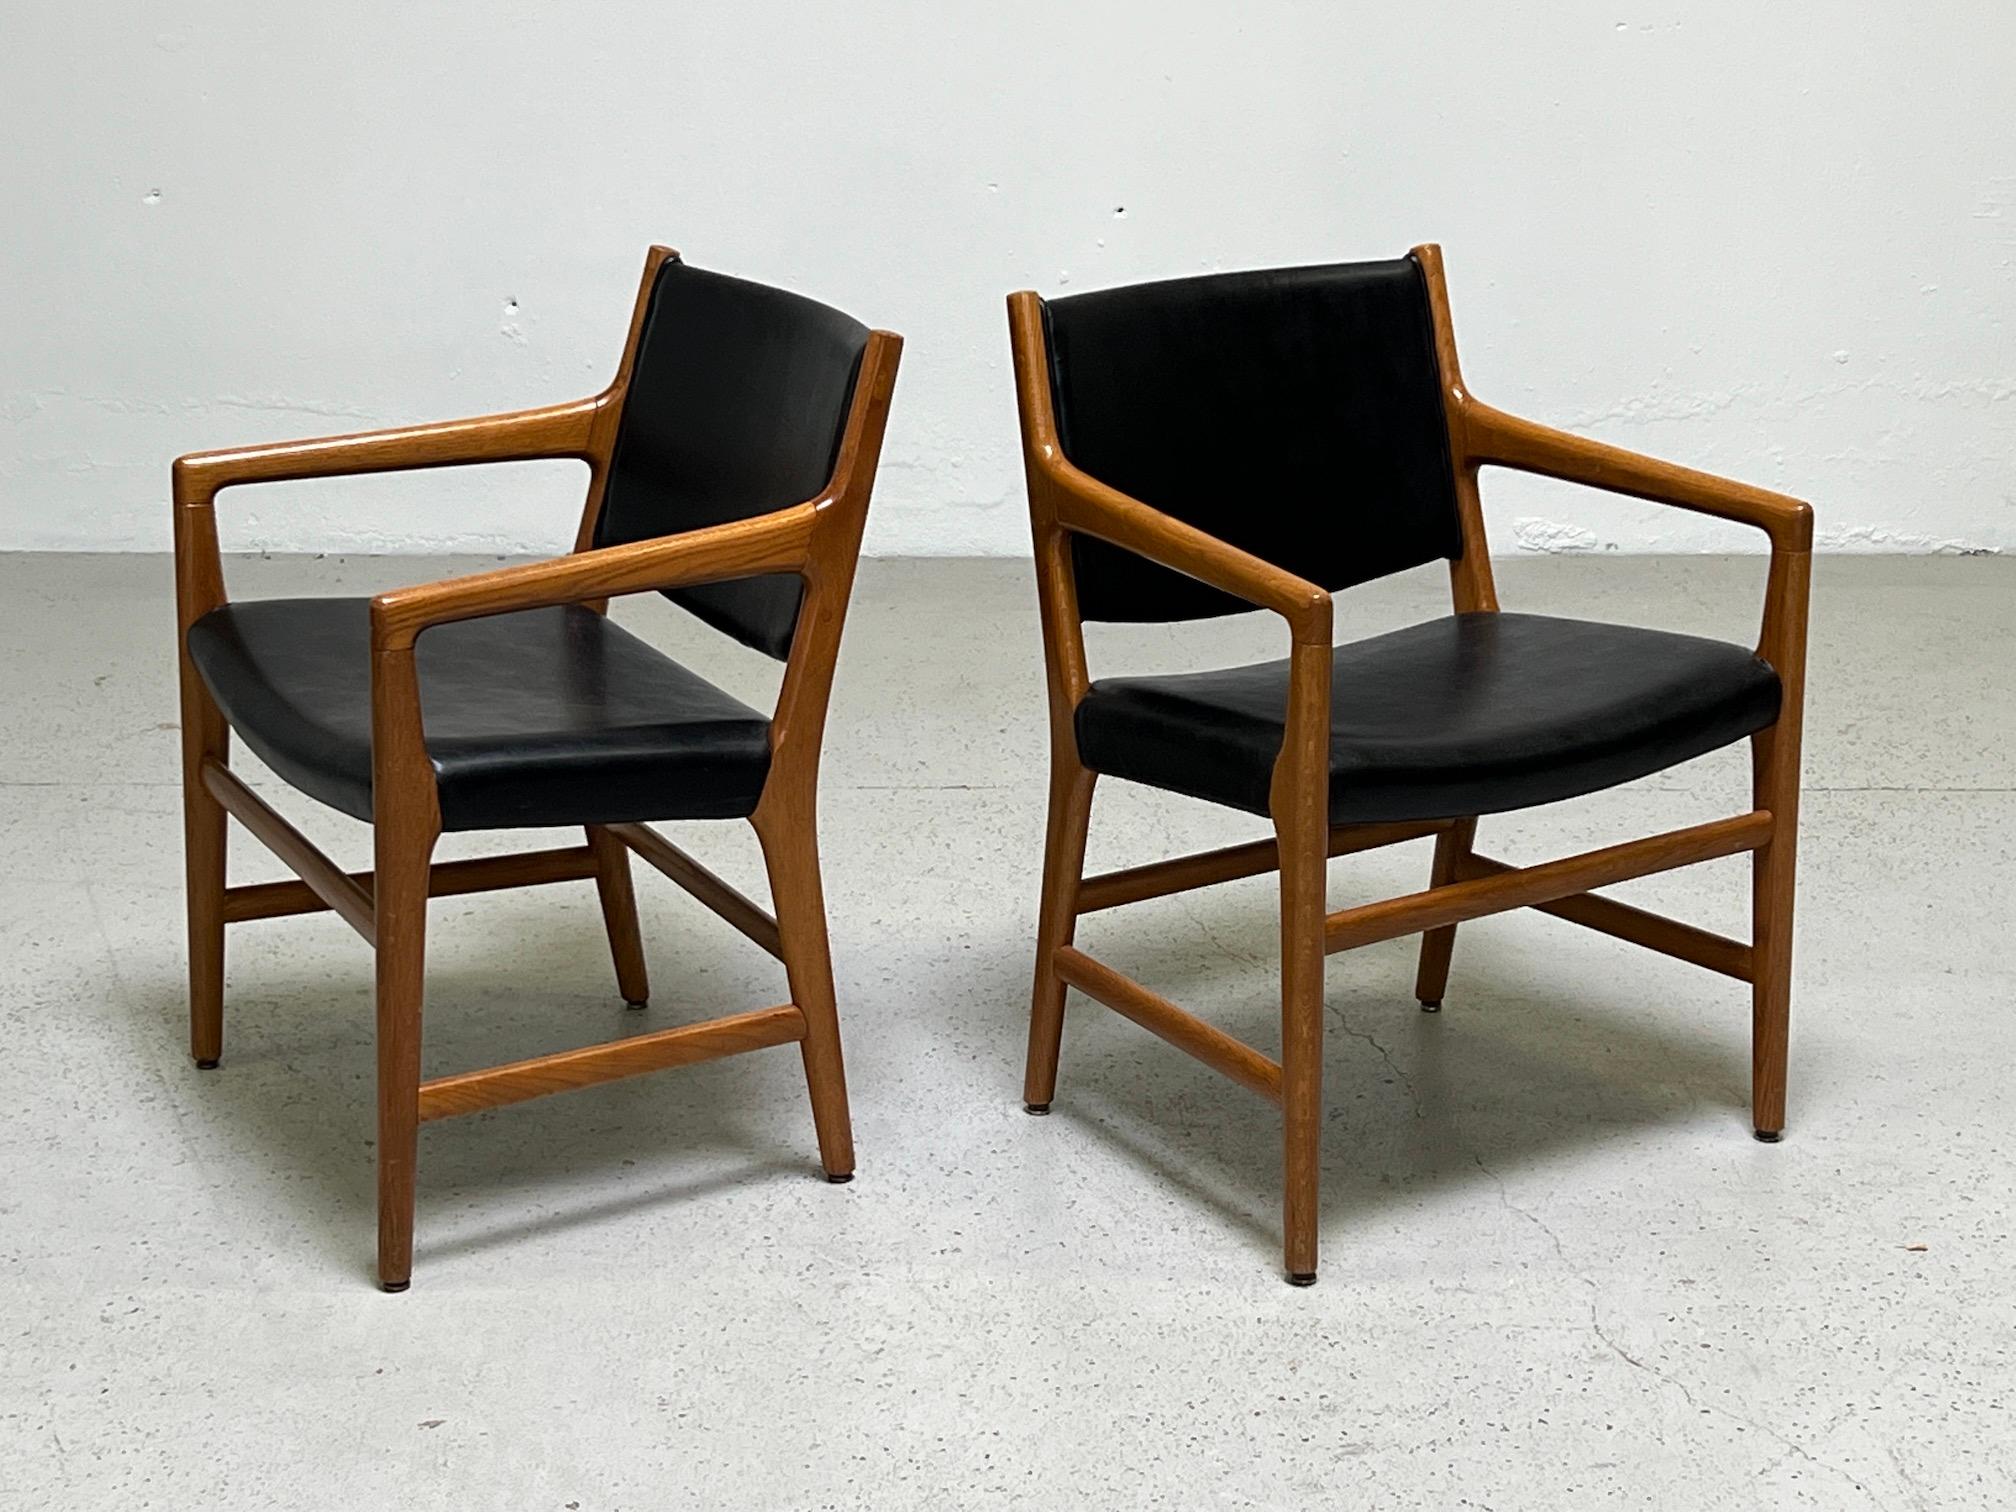 A set of eight oak armchairs model JH507 designed by Hans Wegner for Johannes Hansen. 

This set of chairs came directly from the Francis A. Countway Library of Medicine at the Harvard Medical School. This building was designed by architect Hugh